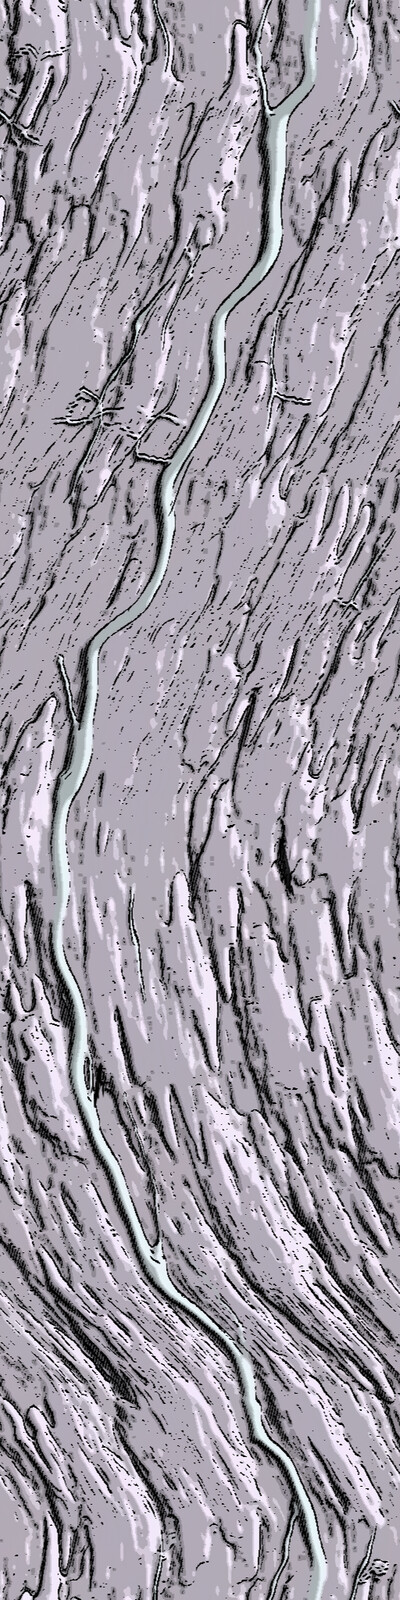 A test with the sketch generator on a bark substance.